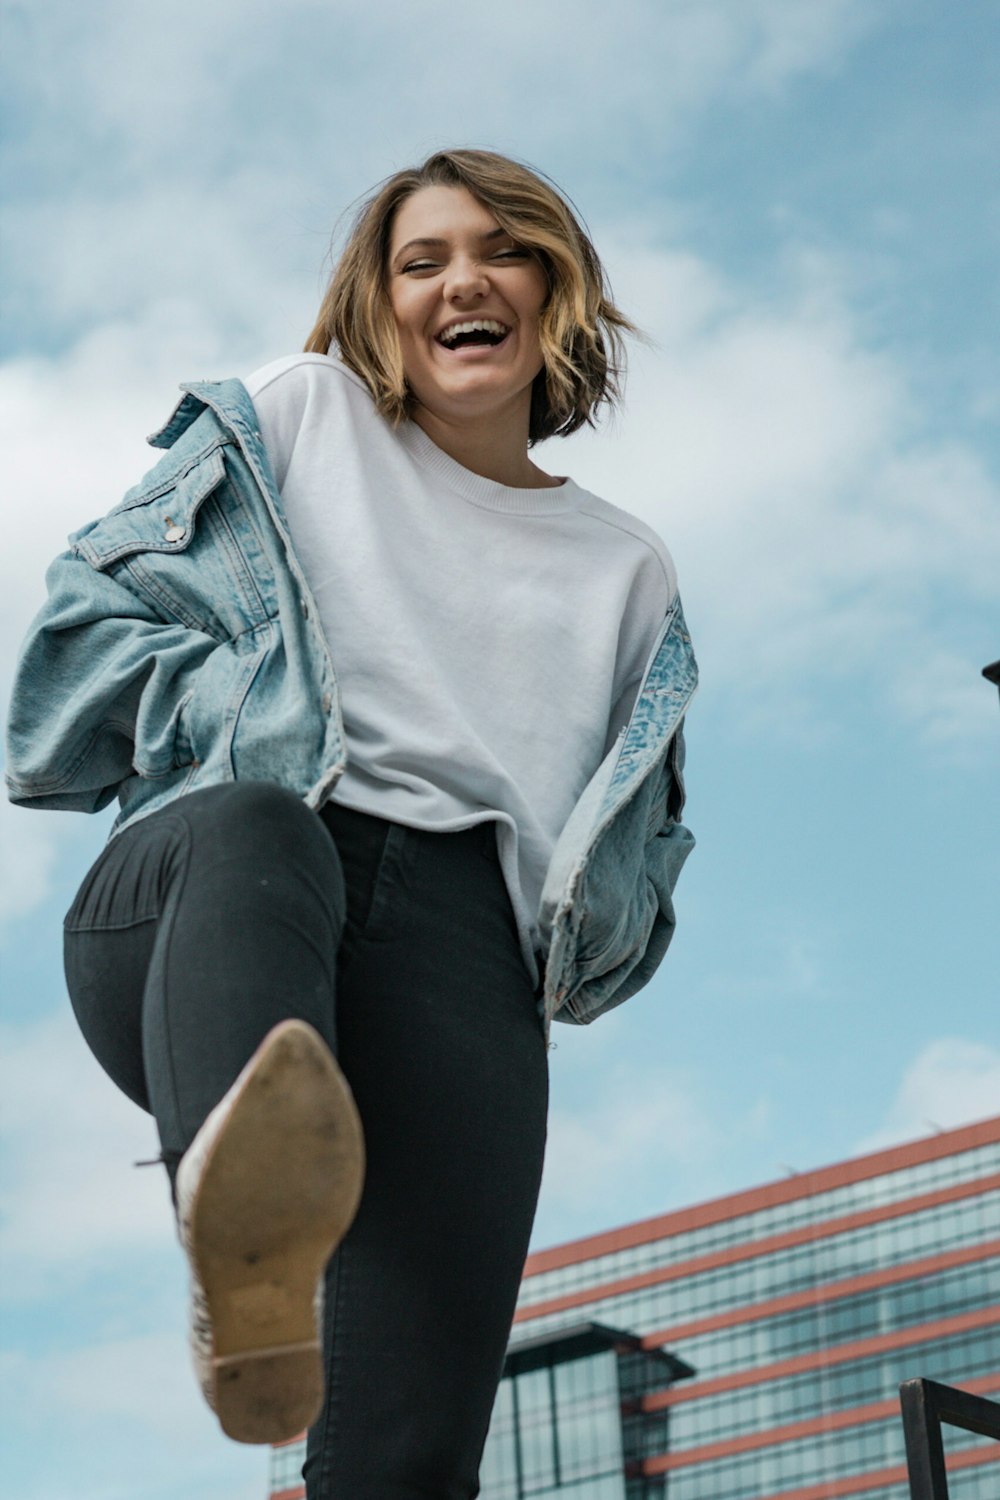 woman wearing white crew-neck t-shirt and blue denim jacket laughing while lifting right leg